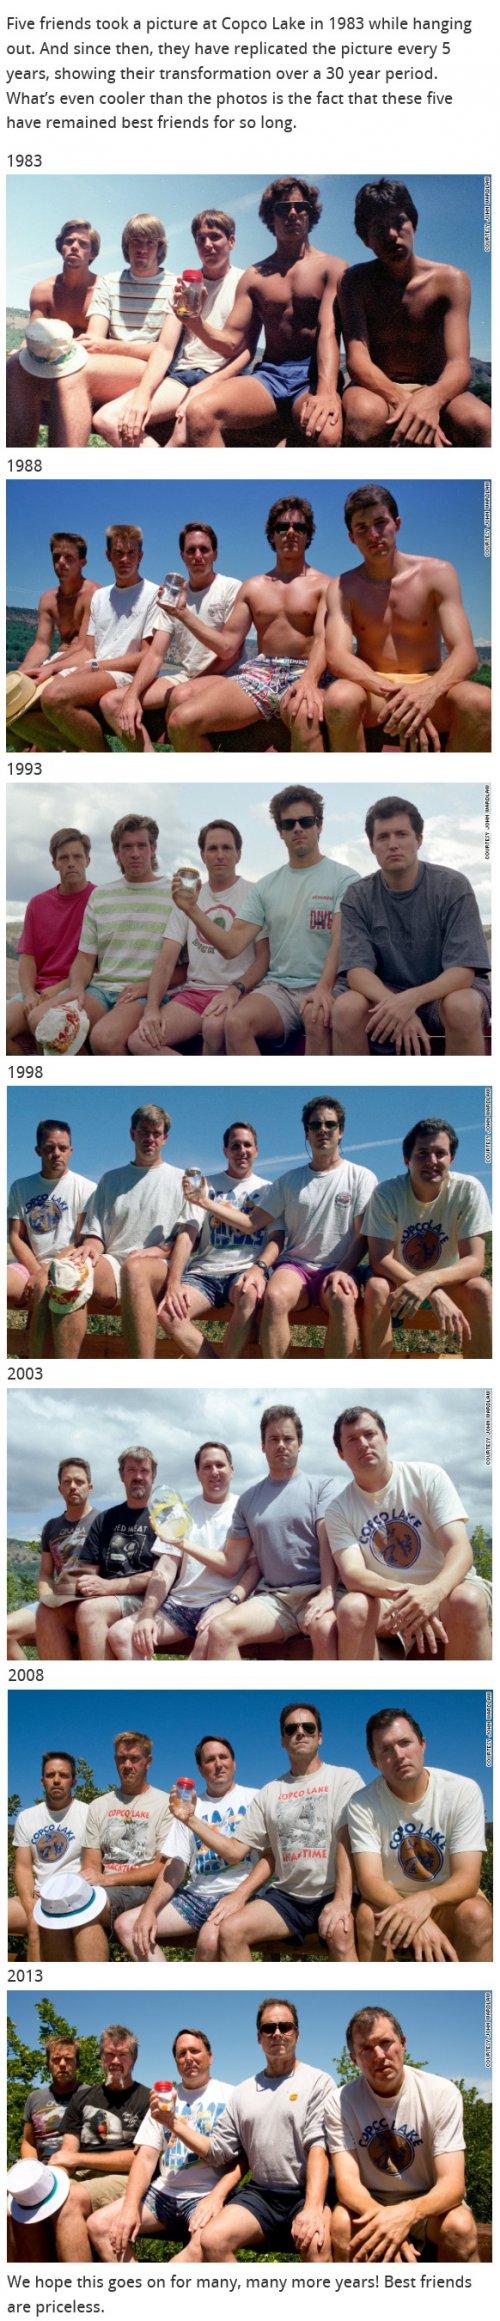 5 Best Friends Take The Same Photo Over 30 Years. This Is Awesome. -   Misc